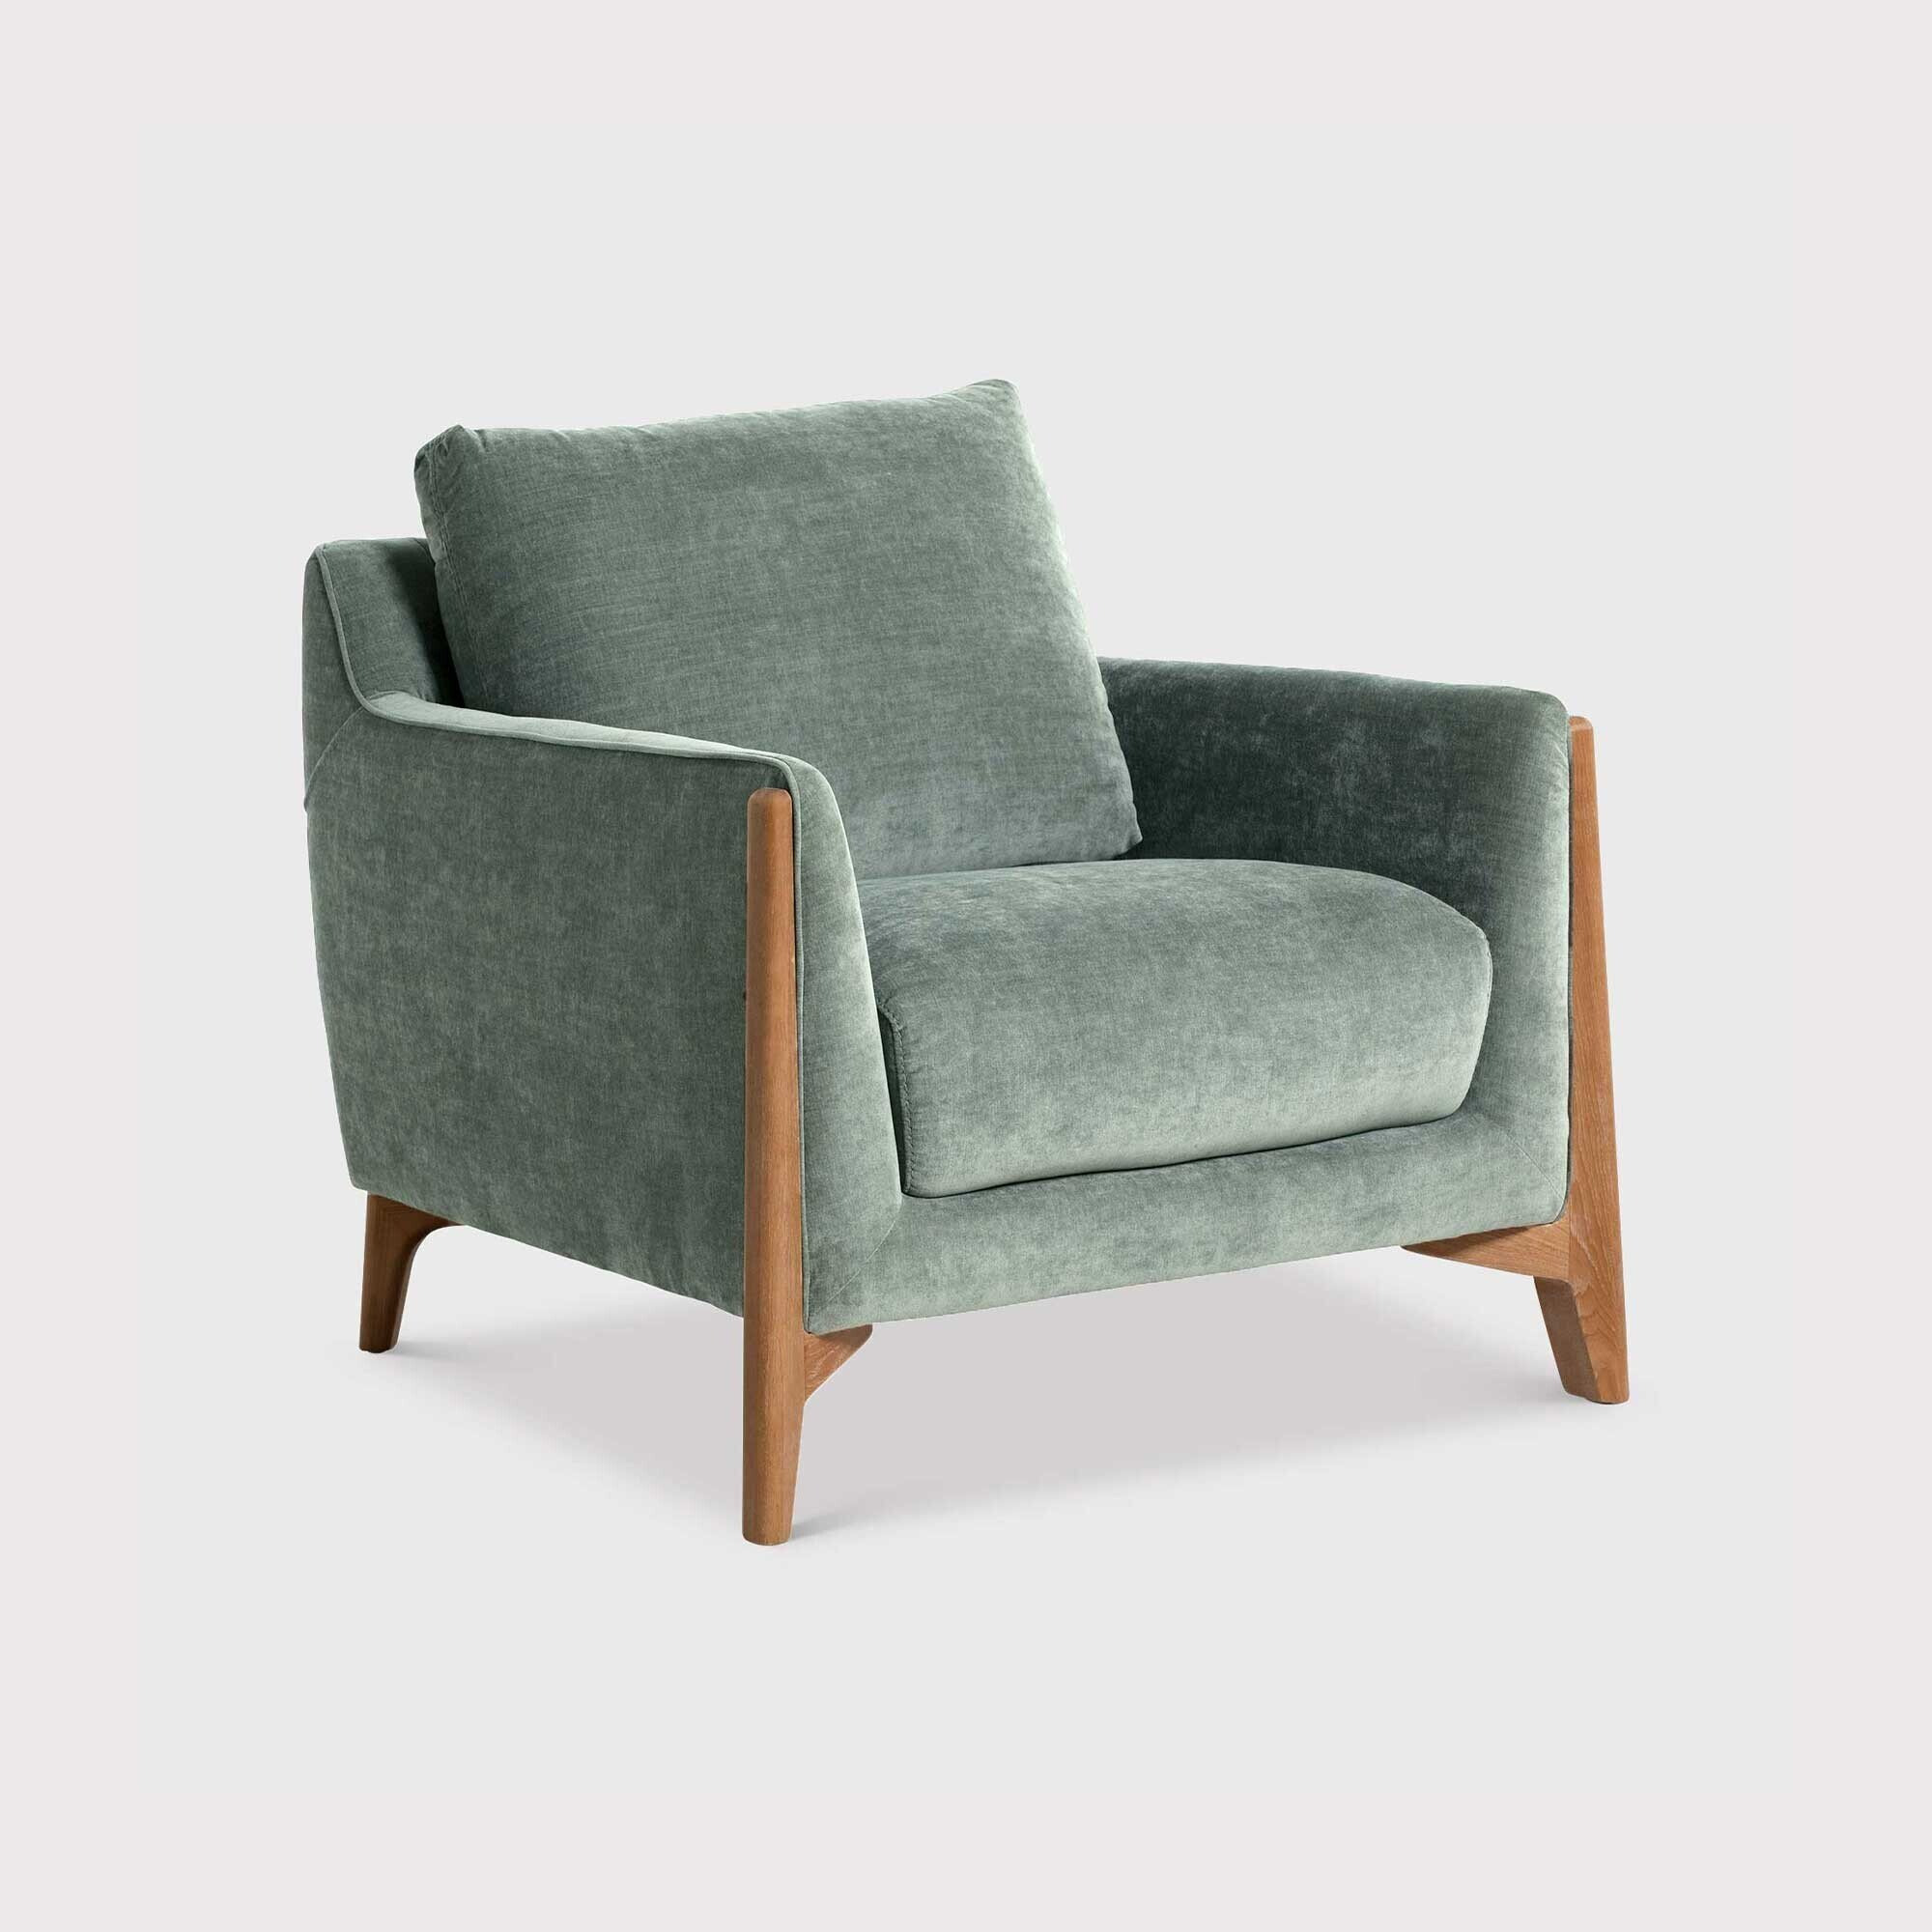 Miles Armchair, Grey Fabric - Barker & Stonehouse - image 1